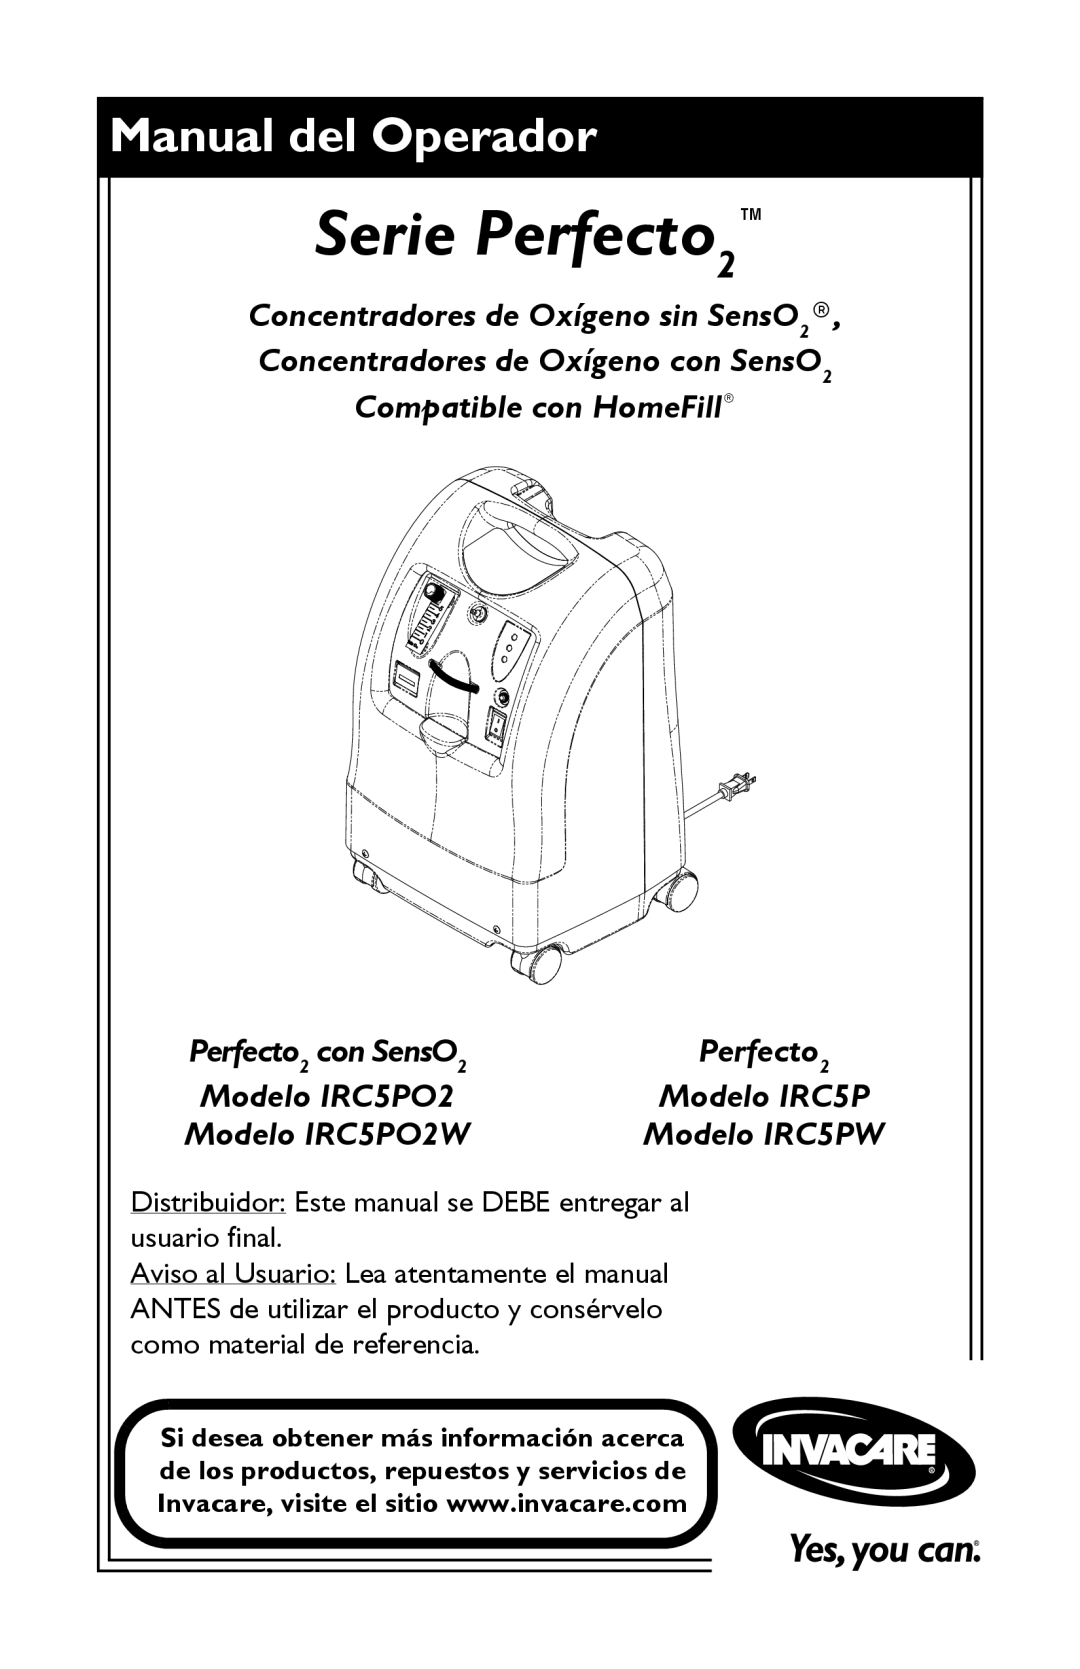 Invacare IRC5PO2V user manual Perfecto2Series, Oxygen Concentrators without SensO2, Oxygen Concentrators with SensO2 